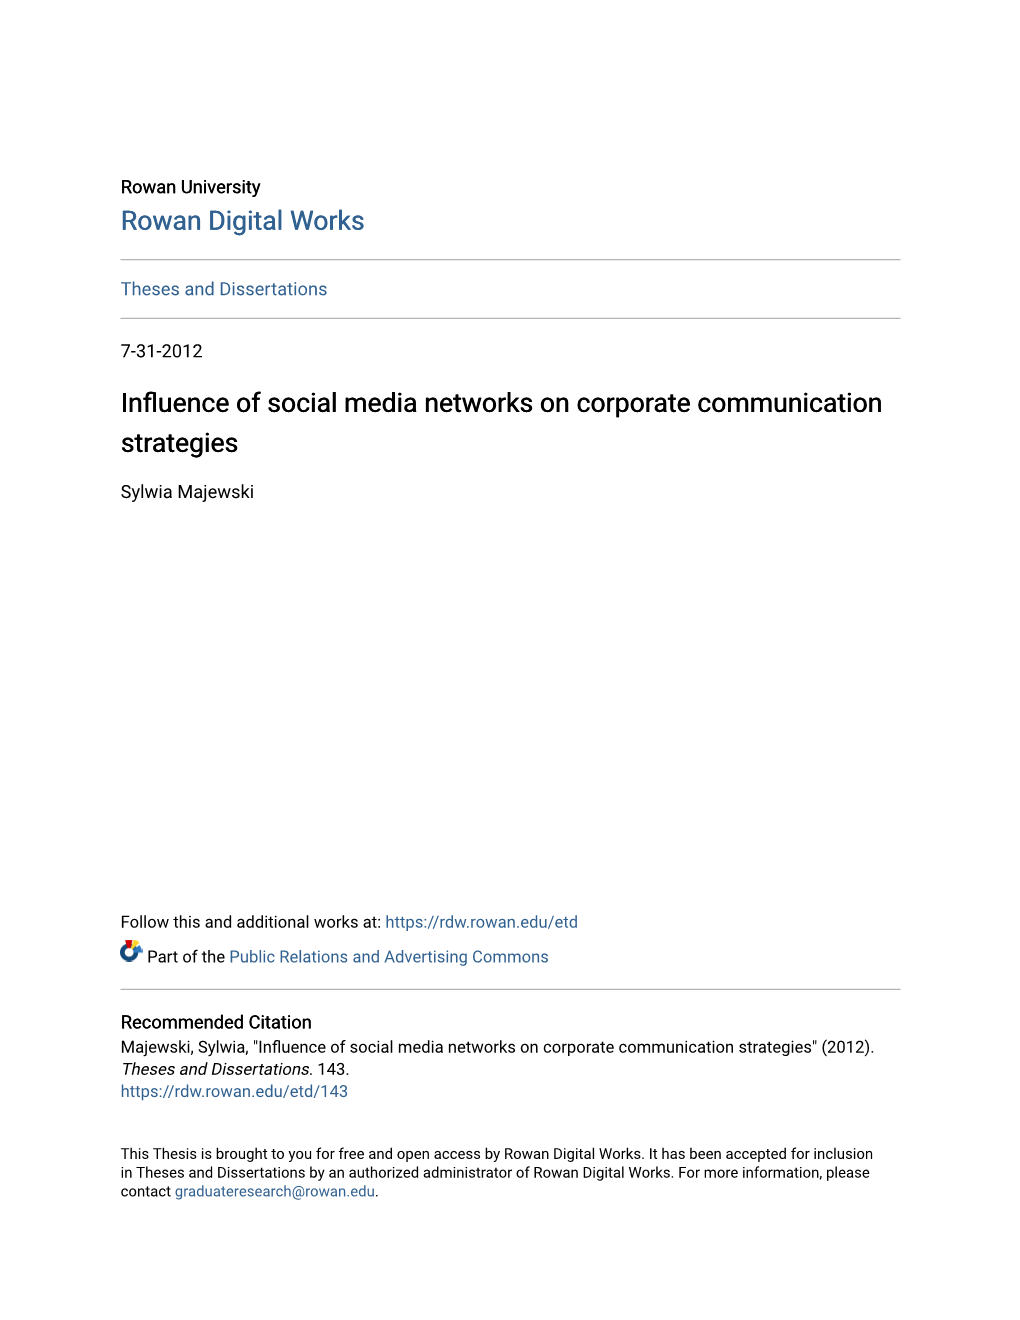 Influence of Social Media Networks on Corporate Communication Strategies